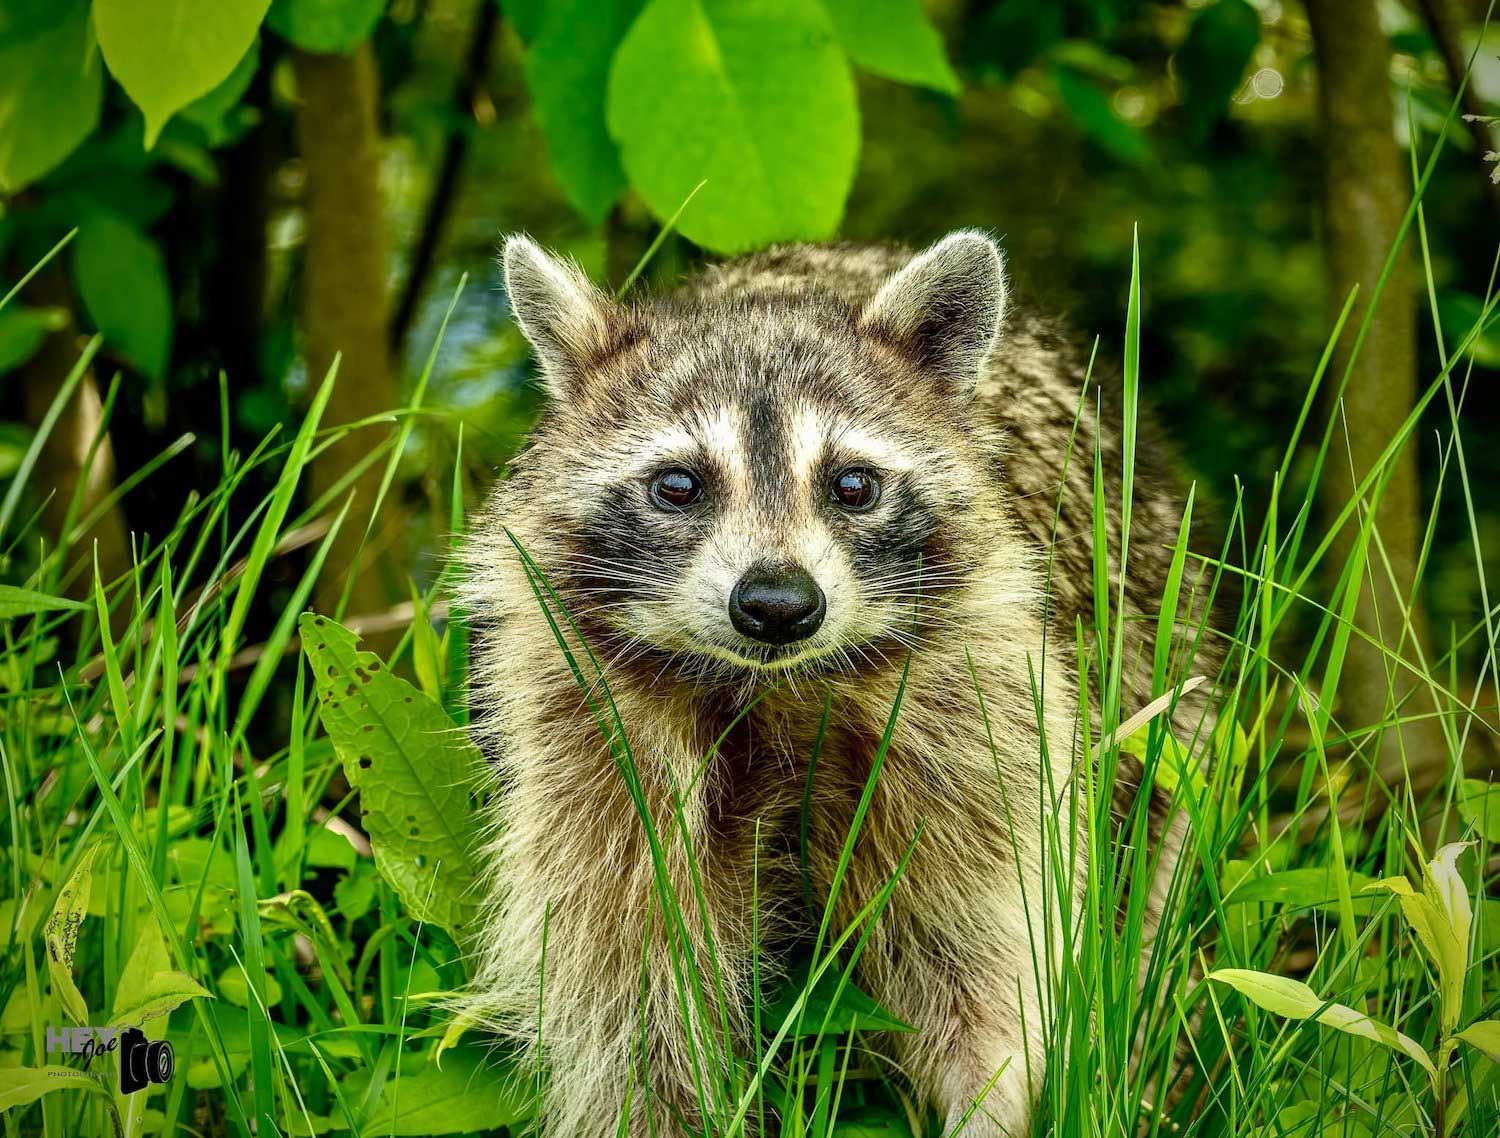 A raccoon standing in the grass.